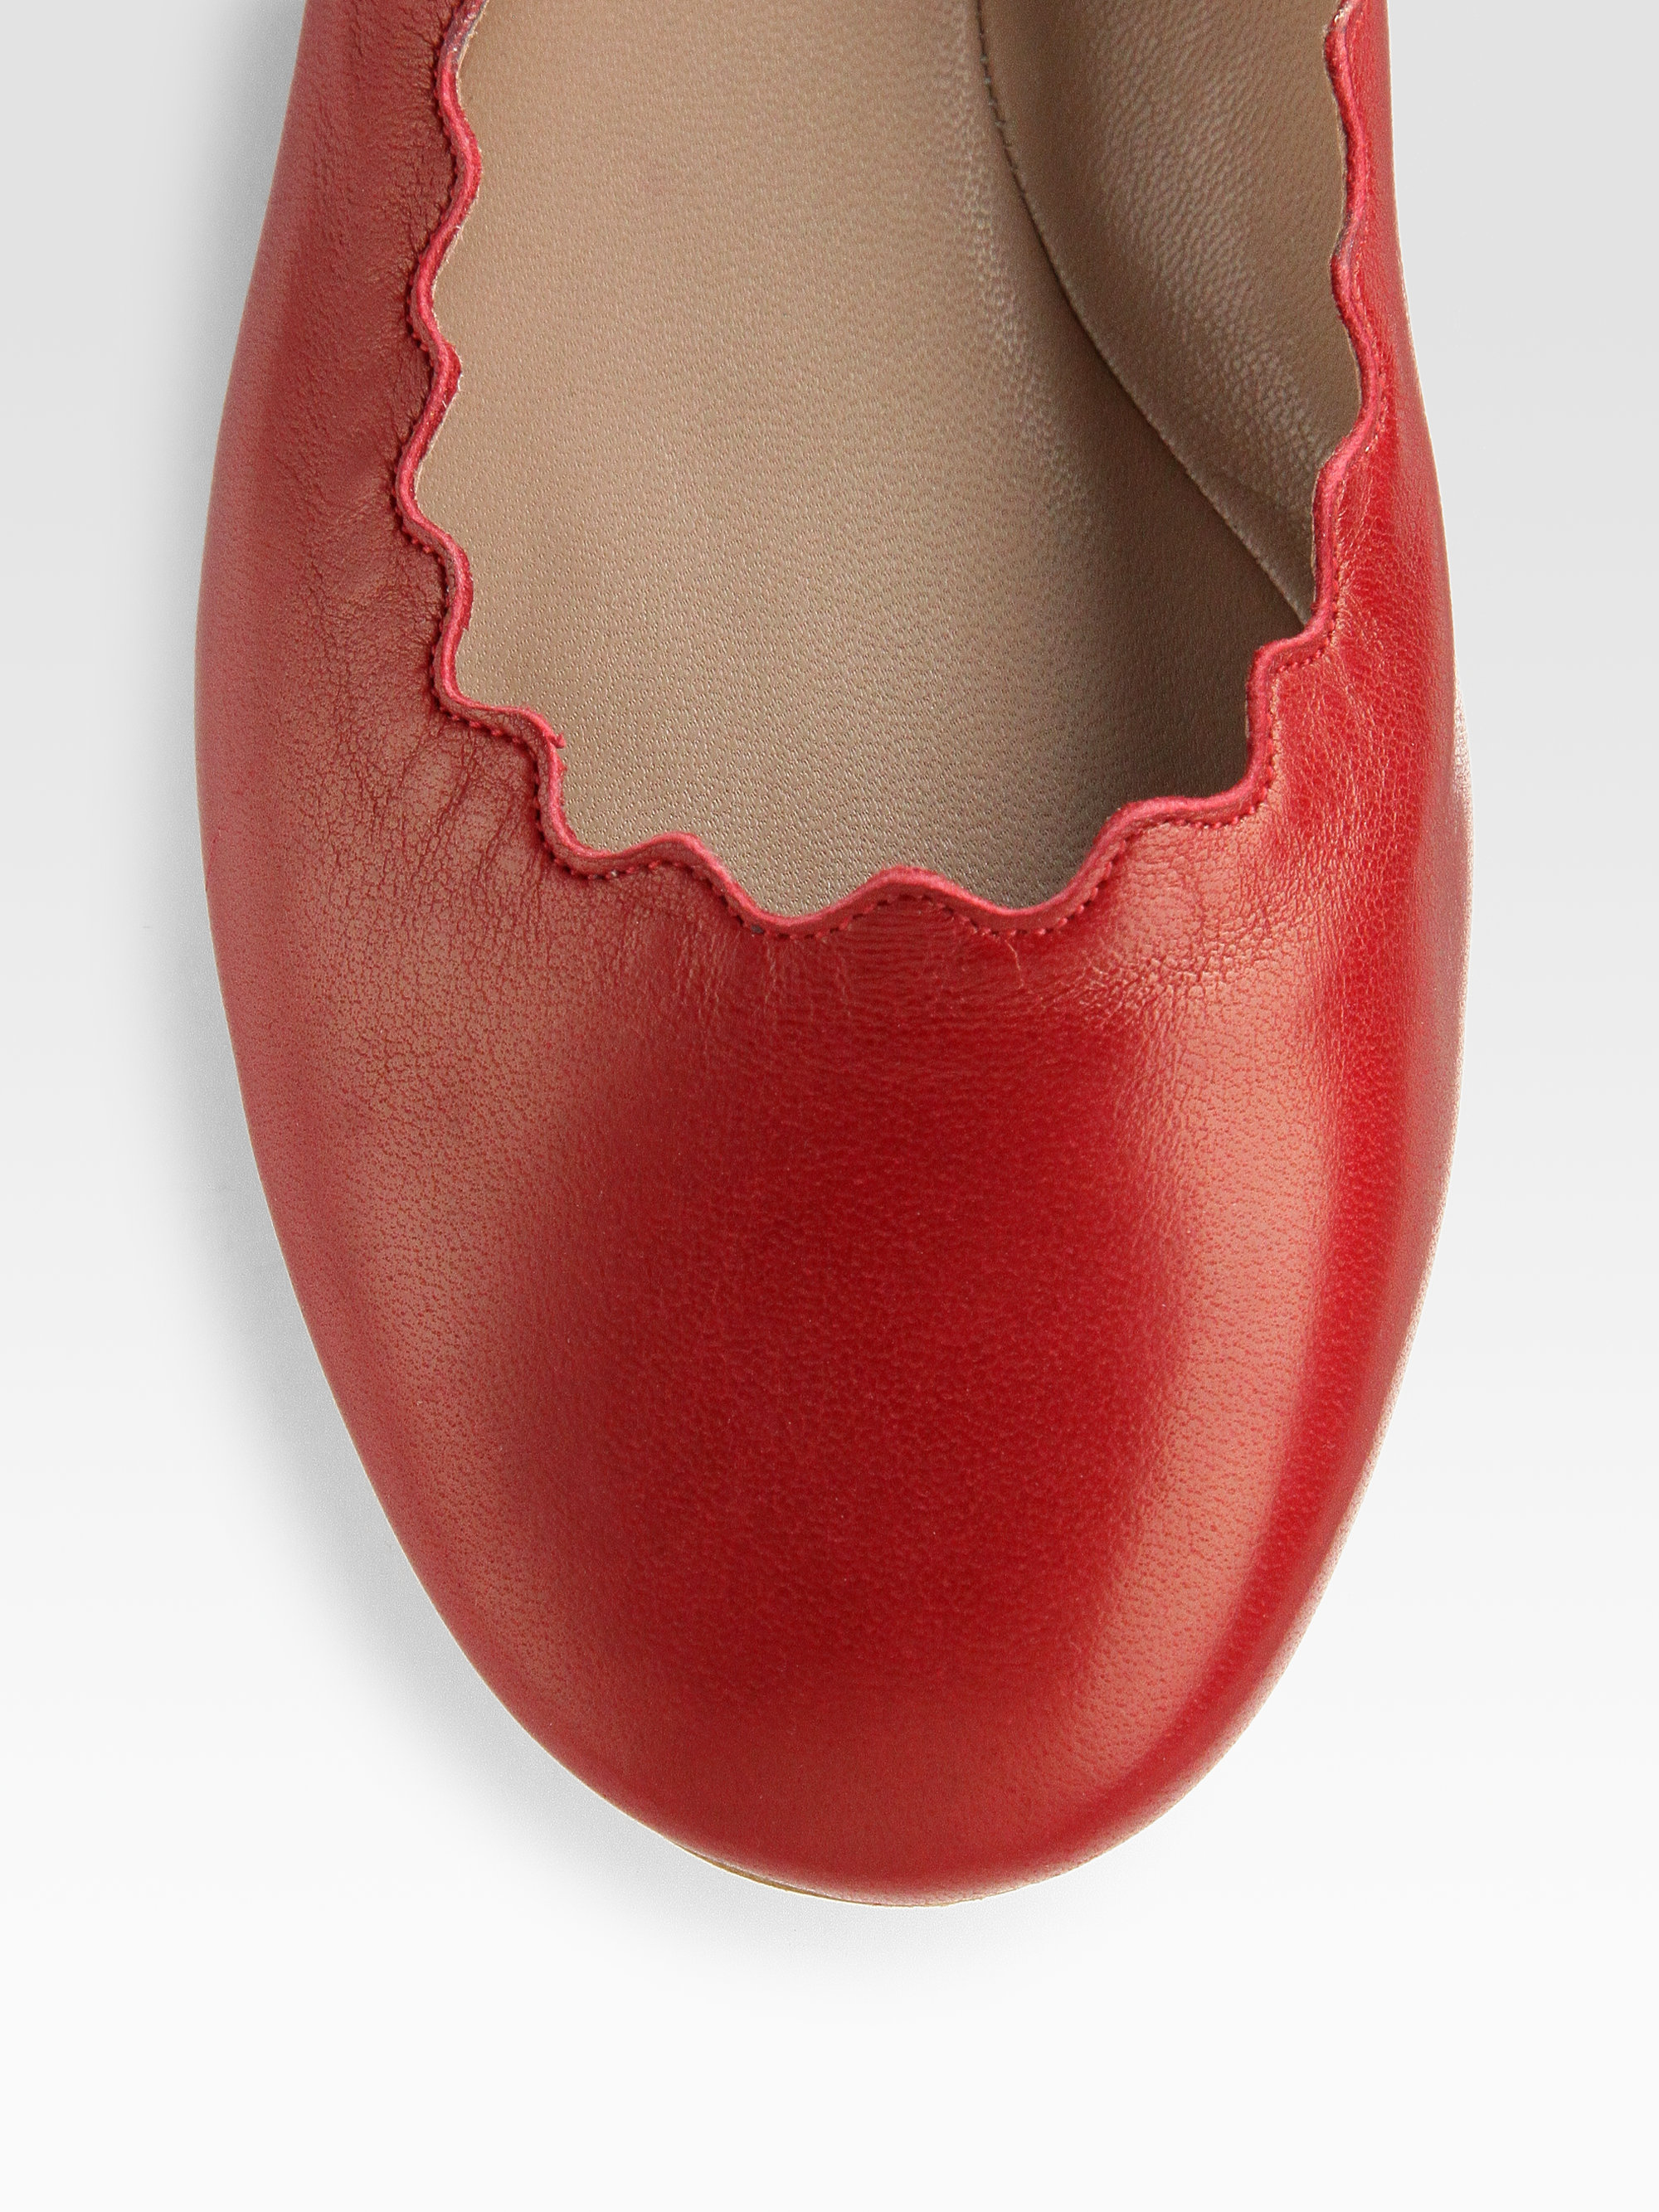 Chloé Scalloped Ballet Flats in Red - Lyst